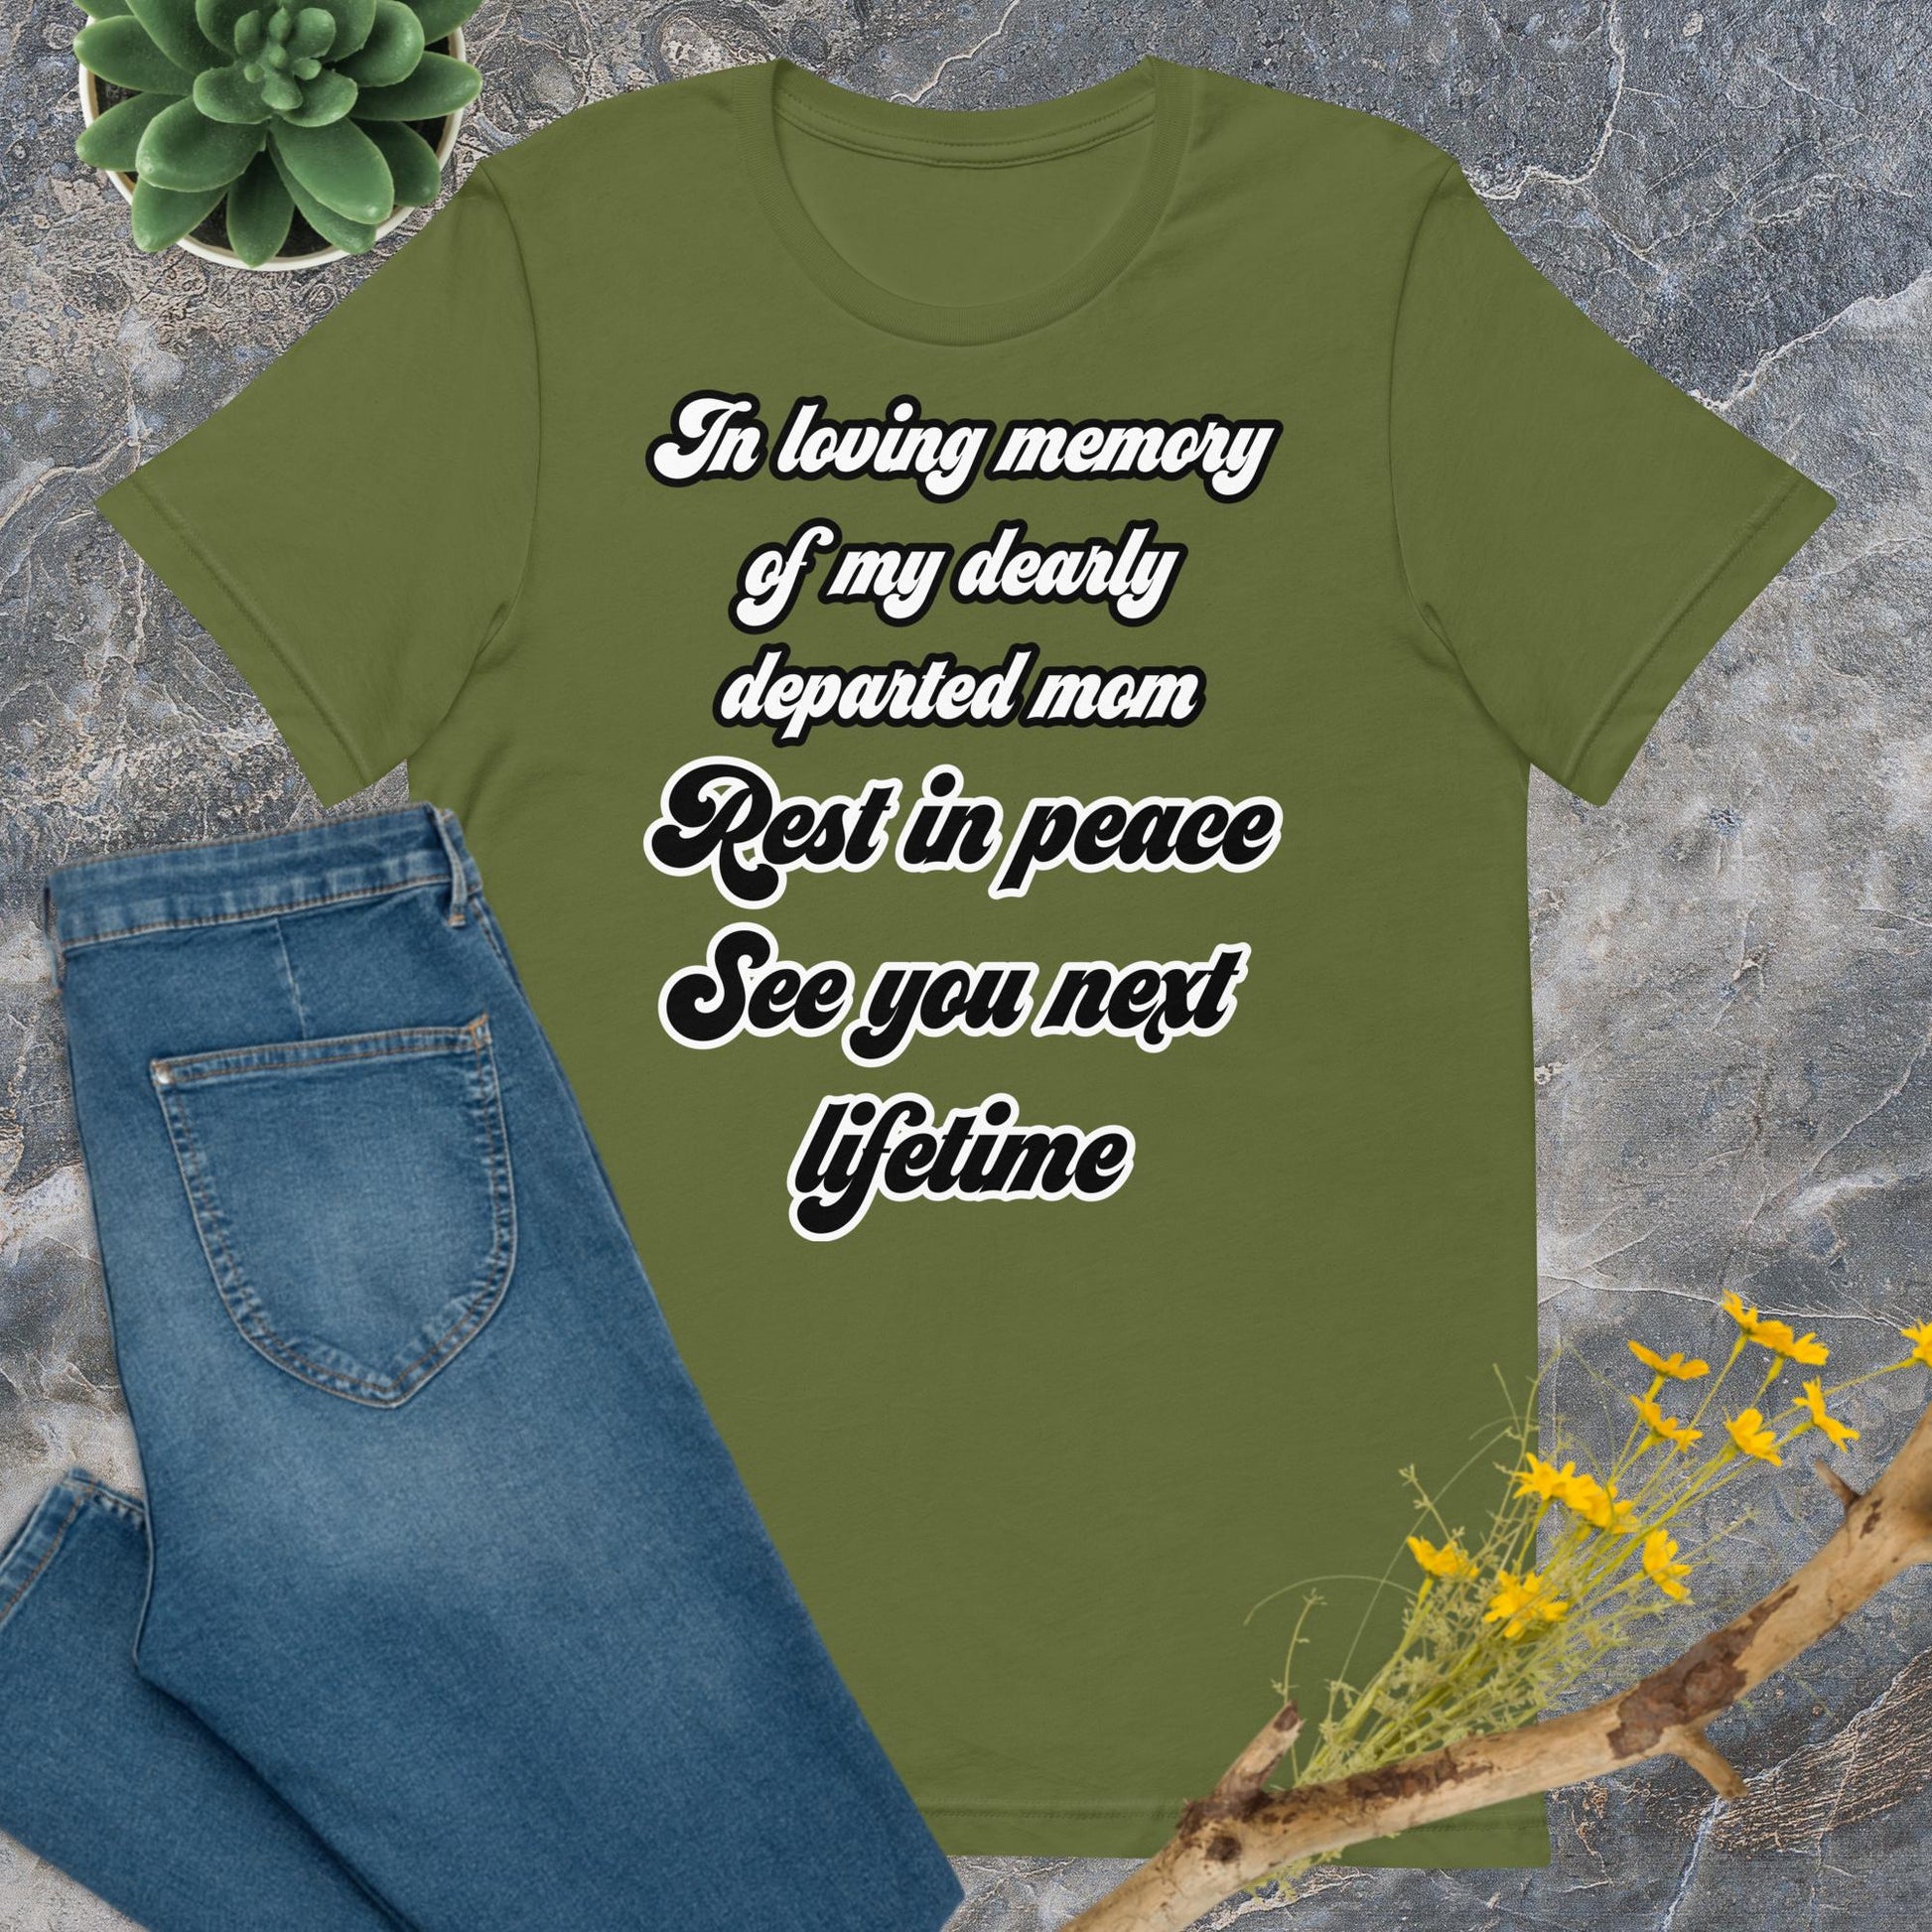 Bella + Canvas 3001 t-shirt. Olive green colored, front view. White and black scripted written quote "In loving memory of my dearly departed mom. Rest in peace. See you next lifetime." Shown laying flat on grey marble with blue jeans, a green succulent plant, and a brown twig with yellow flowers. Jamilliah's Wisdom Is Timeless Shop - wisdomistimeless.com.